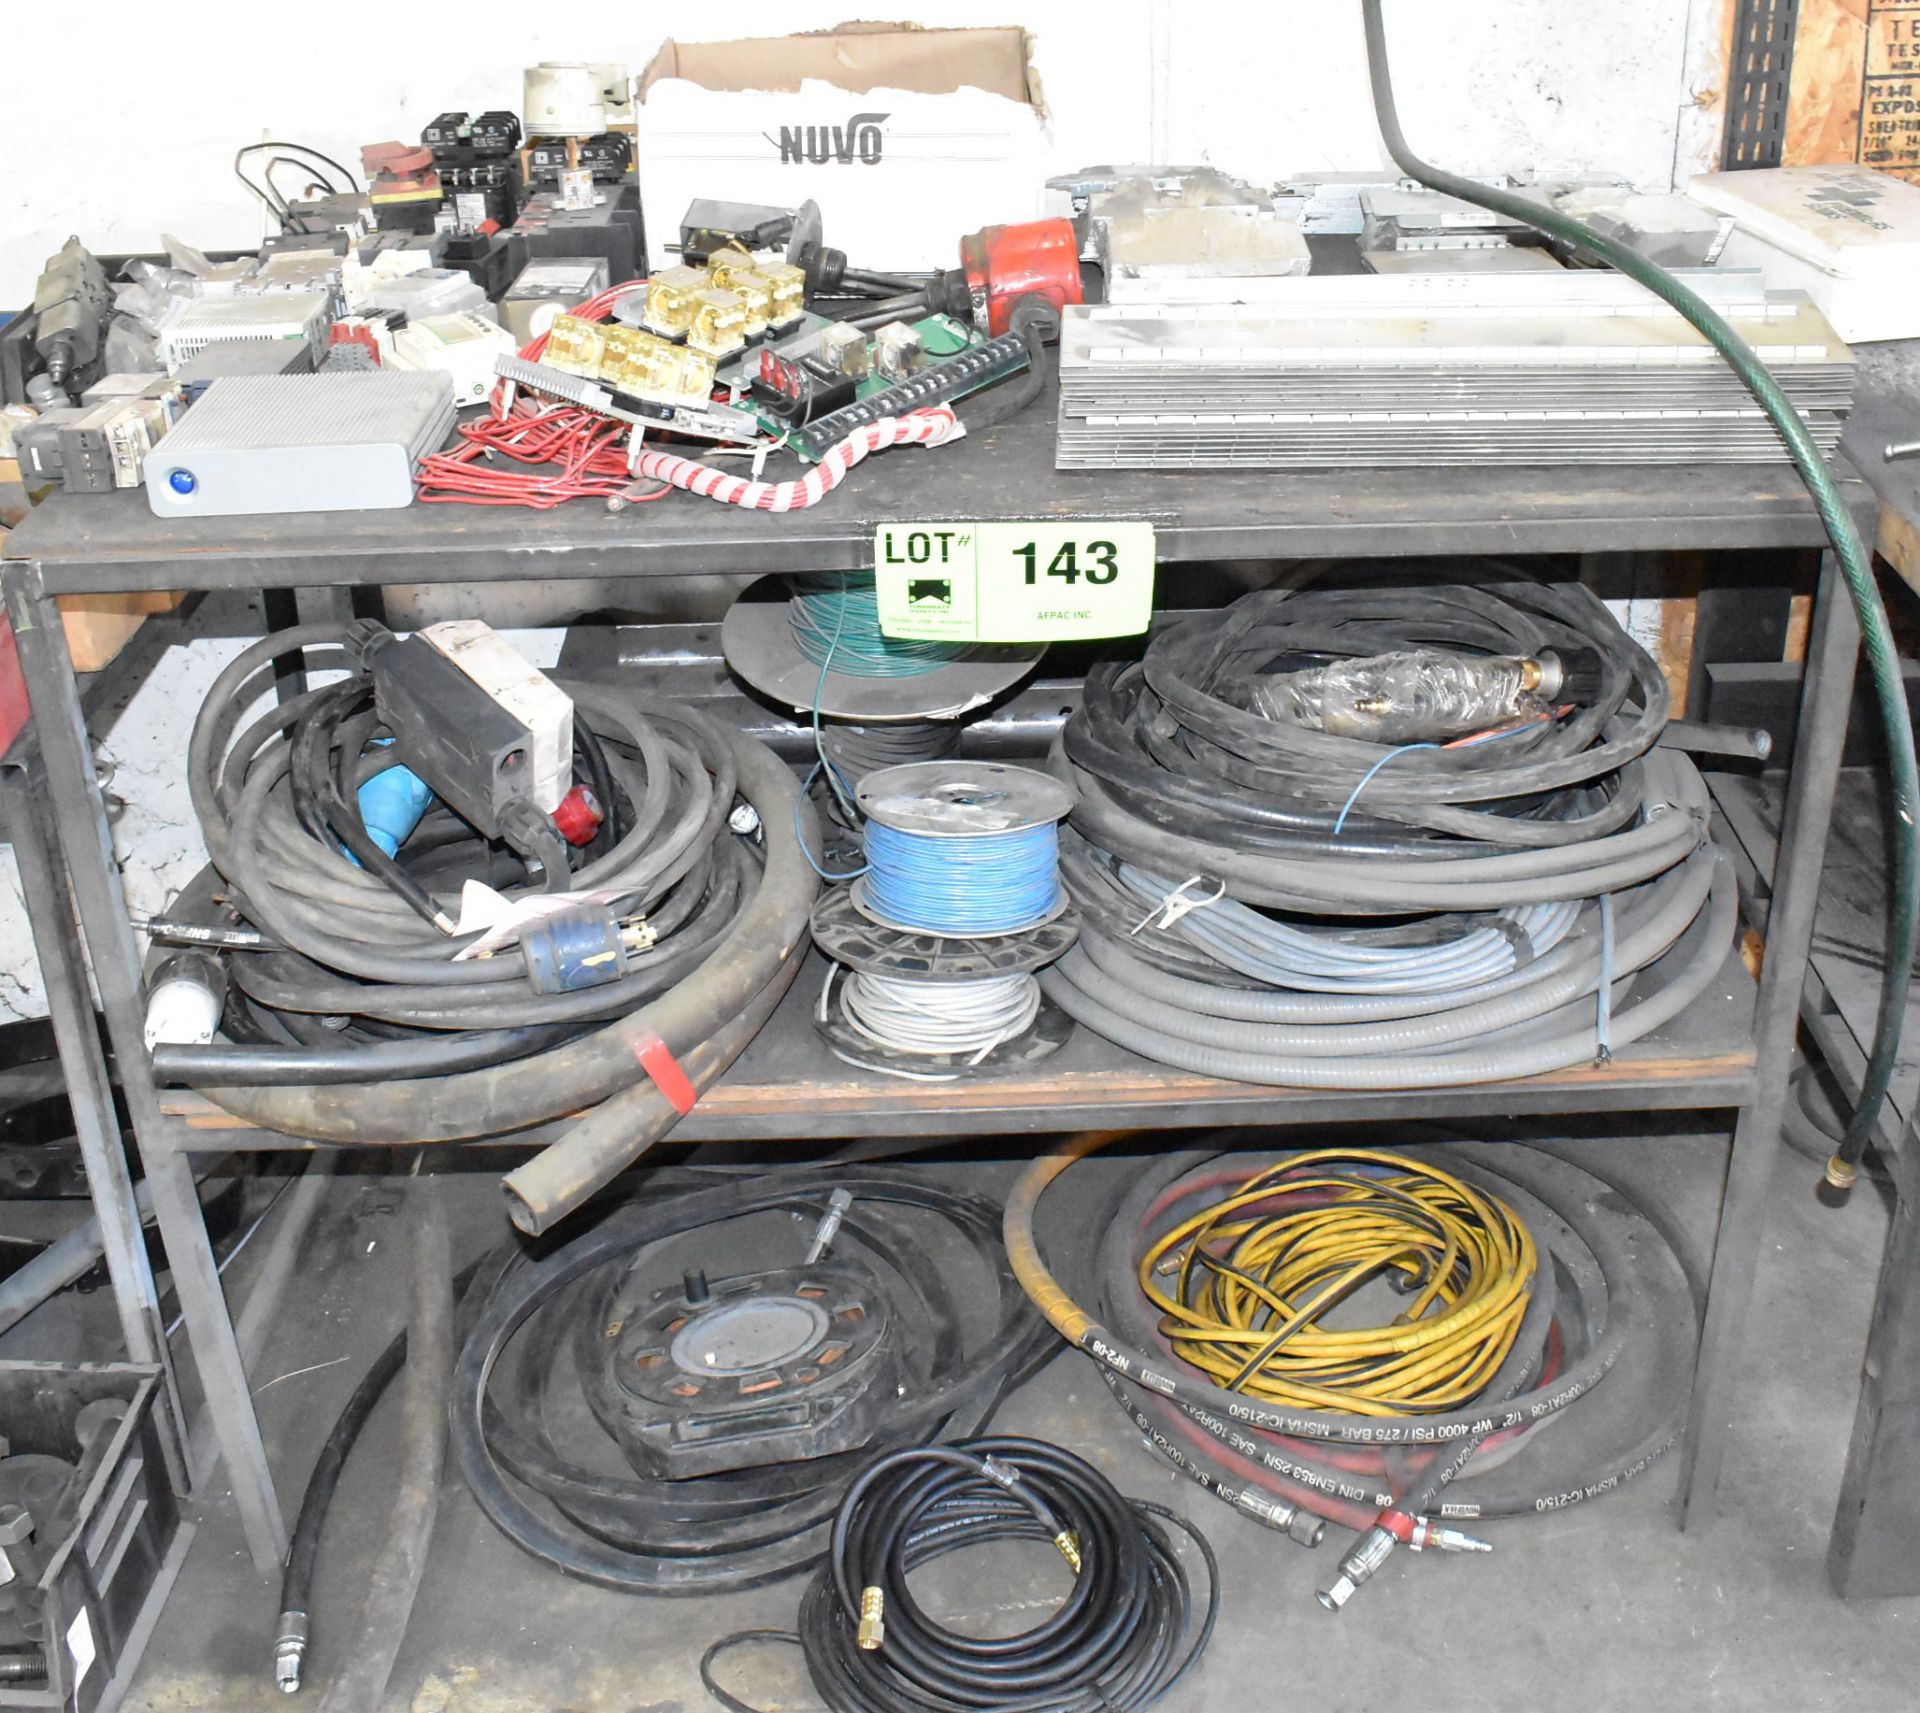 LOT/ SHOP TABLE WITH CONTENTS CONSISTING OF ELECTRICAL COMPONENTS, WIRE AND HYDRAULIC HOSE